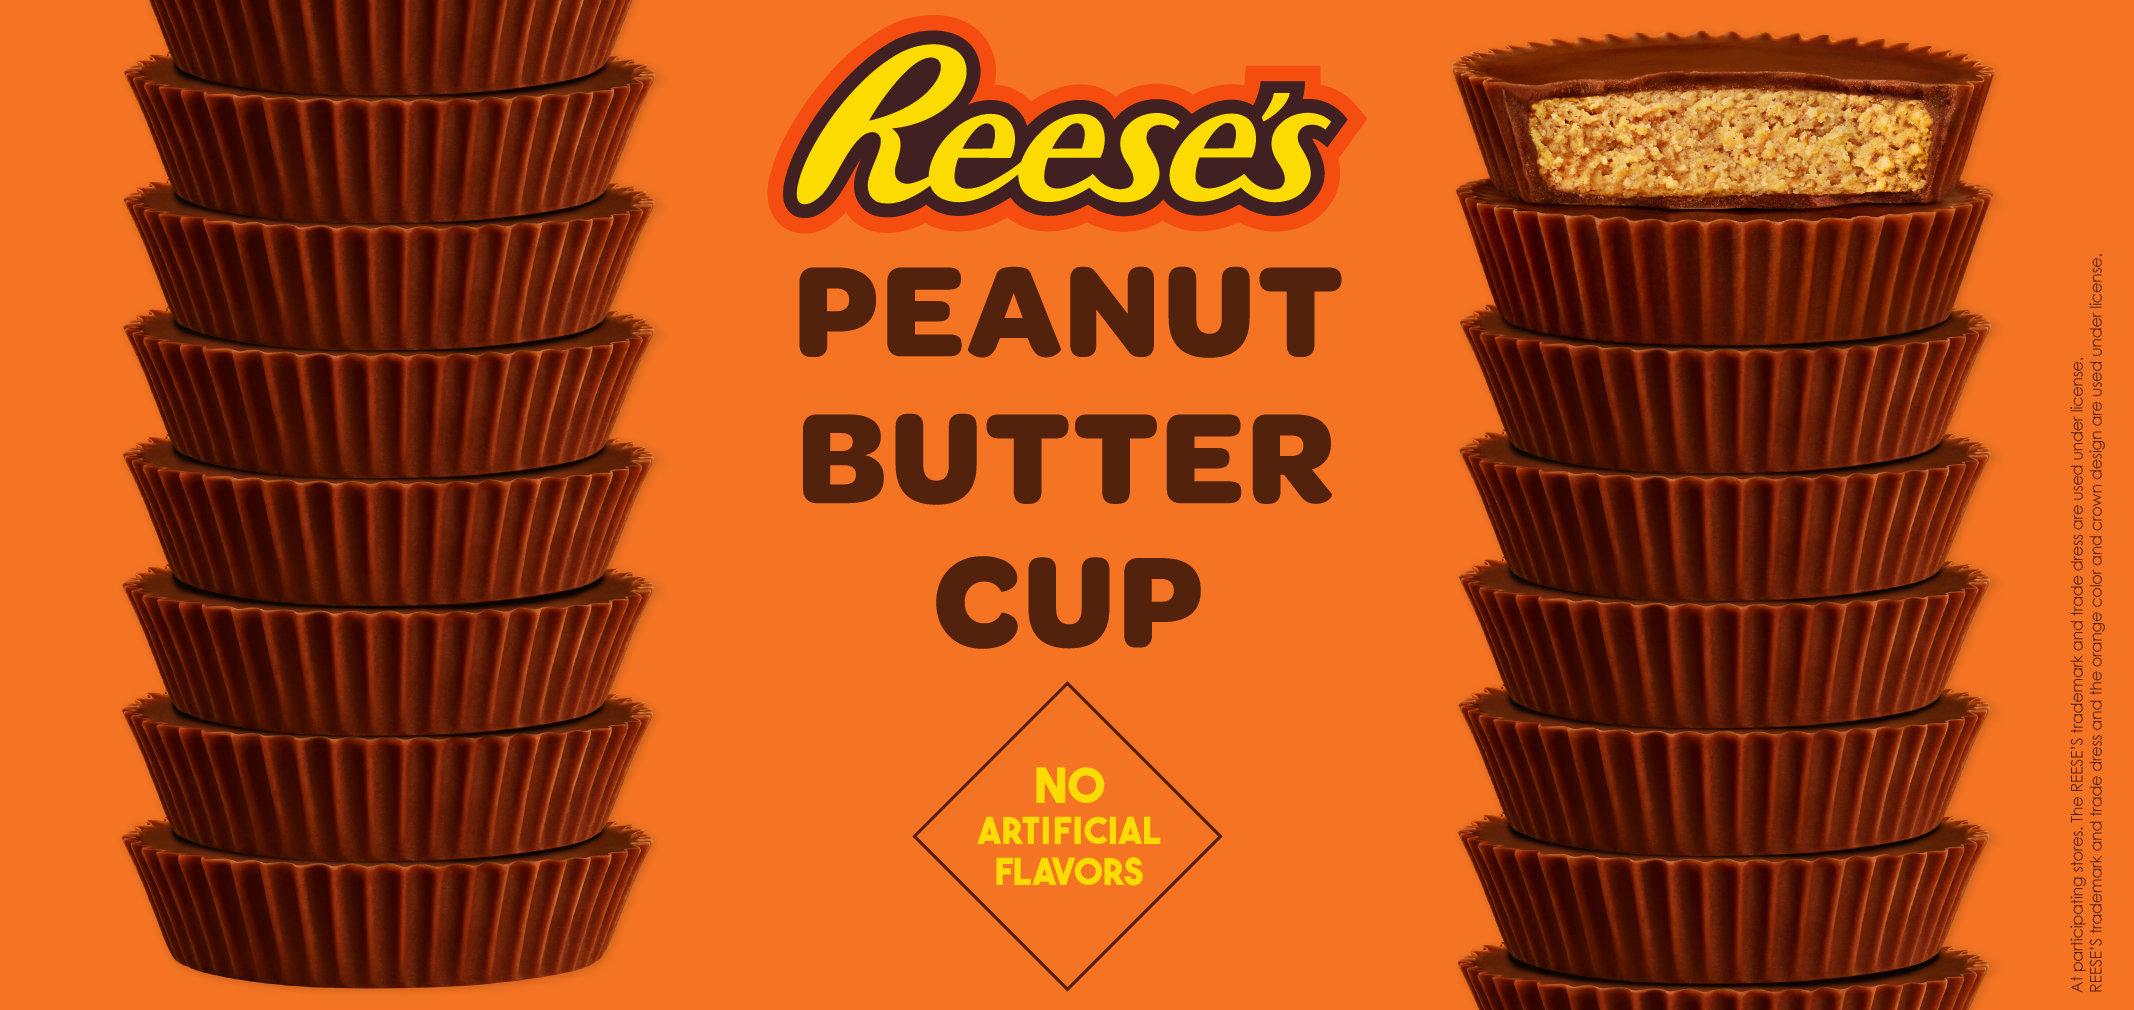 reese’s® peanut butter cup® label image